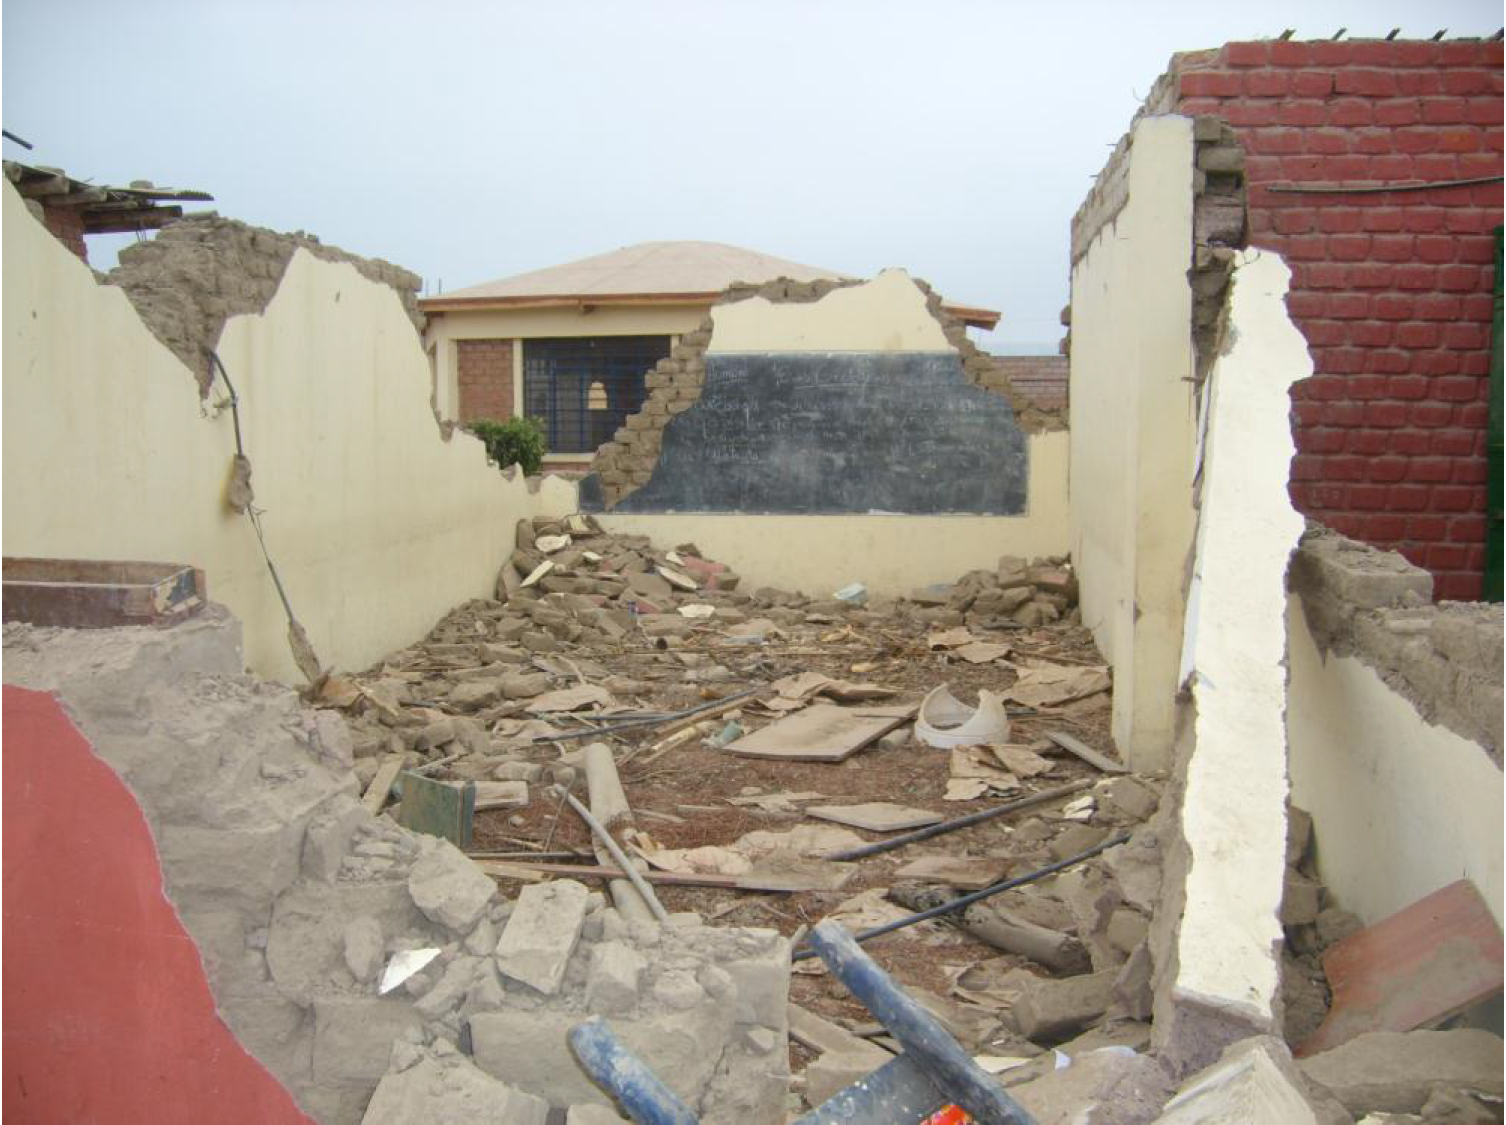   Destruction caused by 2007 Pisco Earthquake, Photo by Juan Carlos Lam  